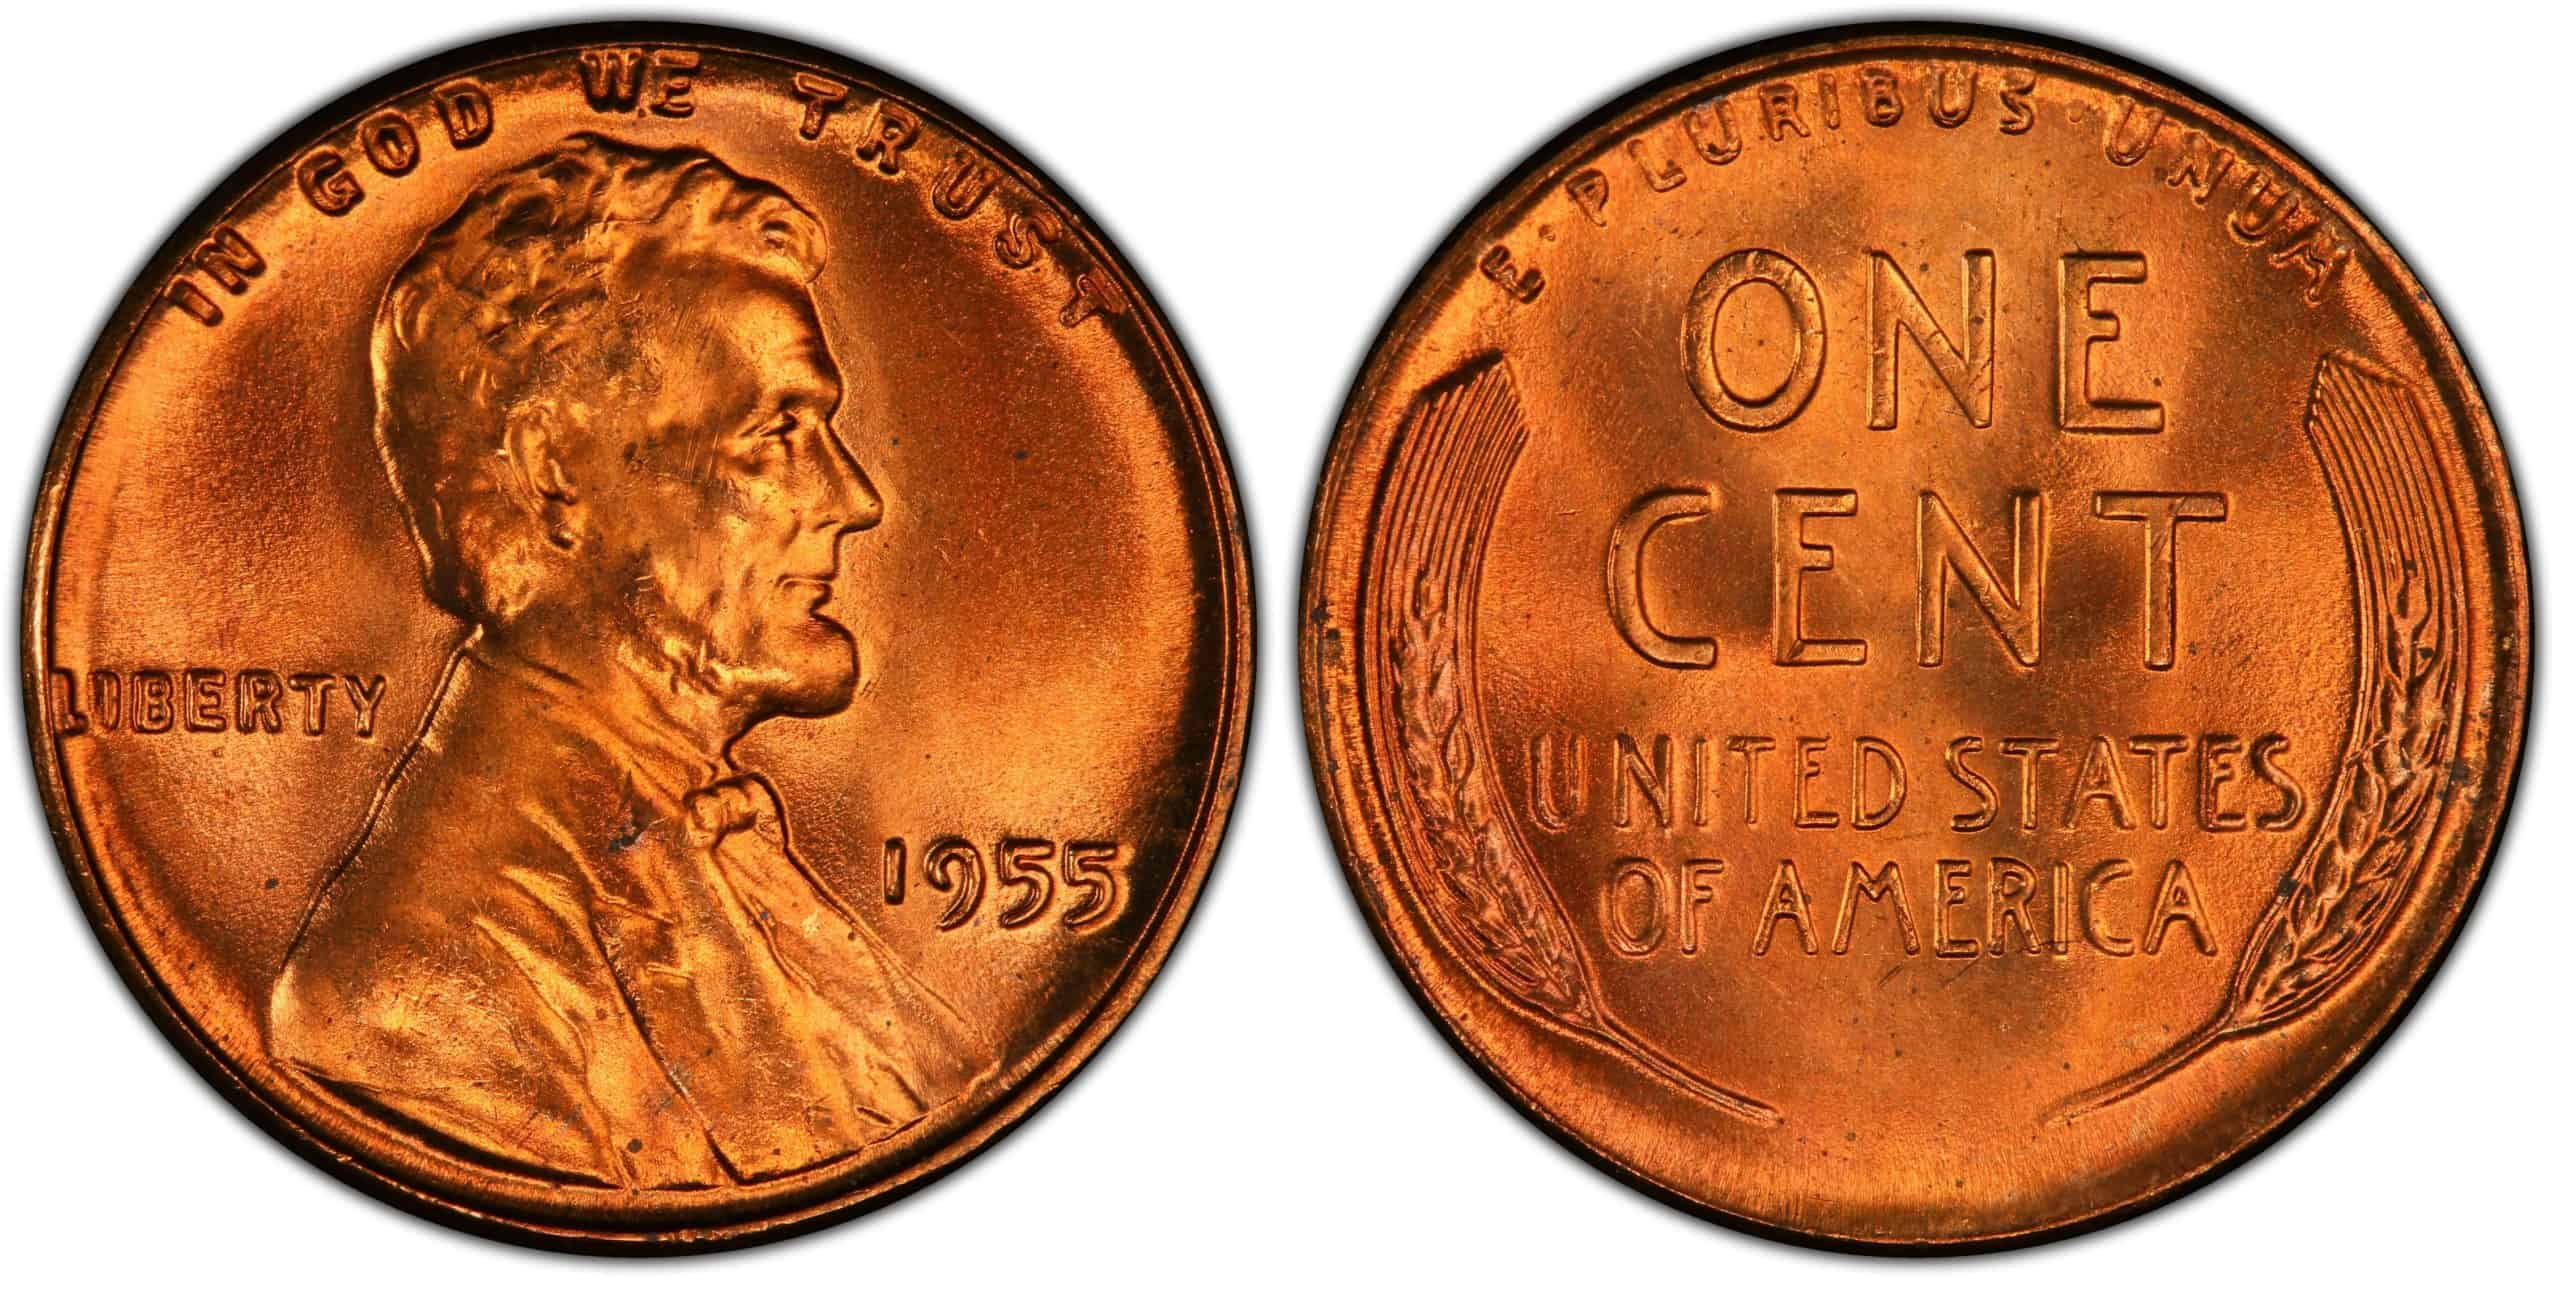 What is the 1955 Penny